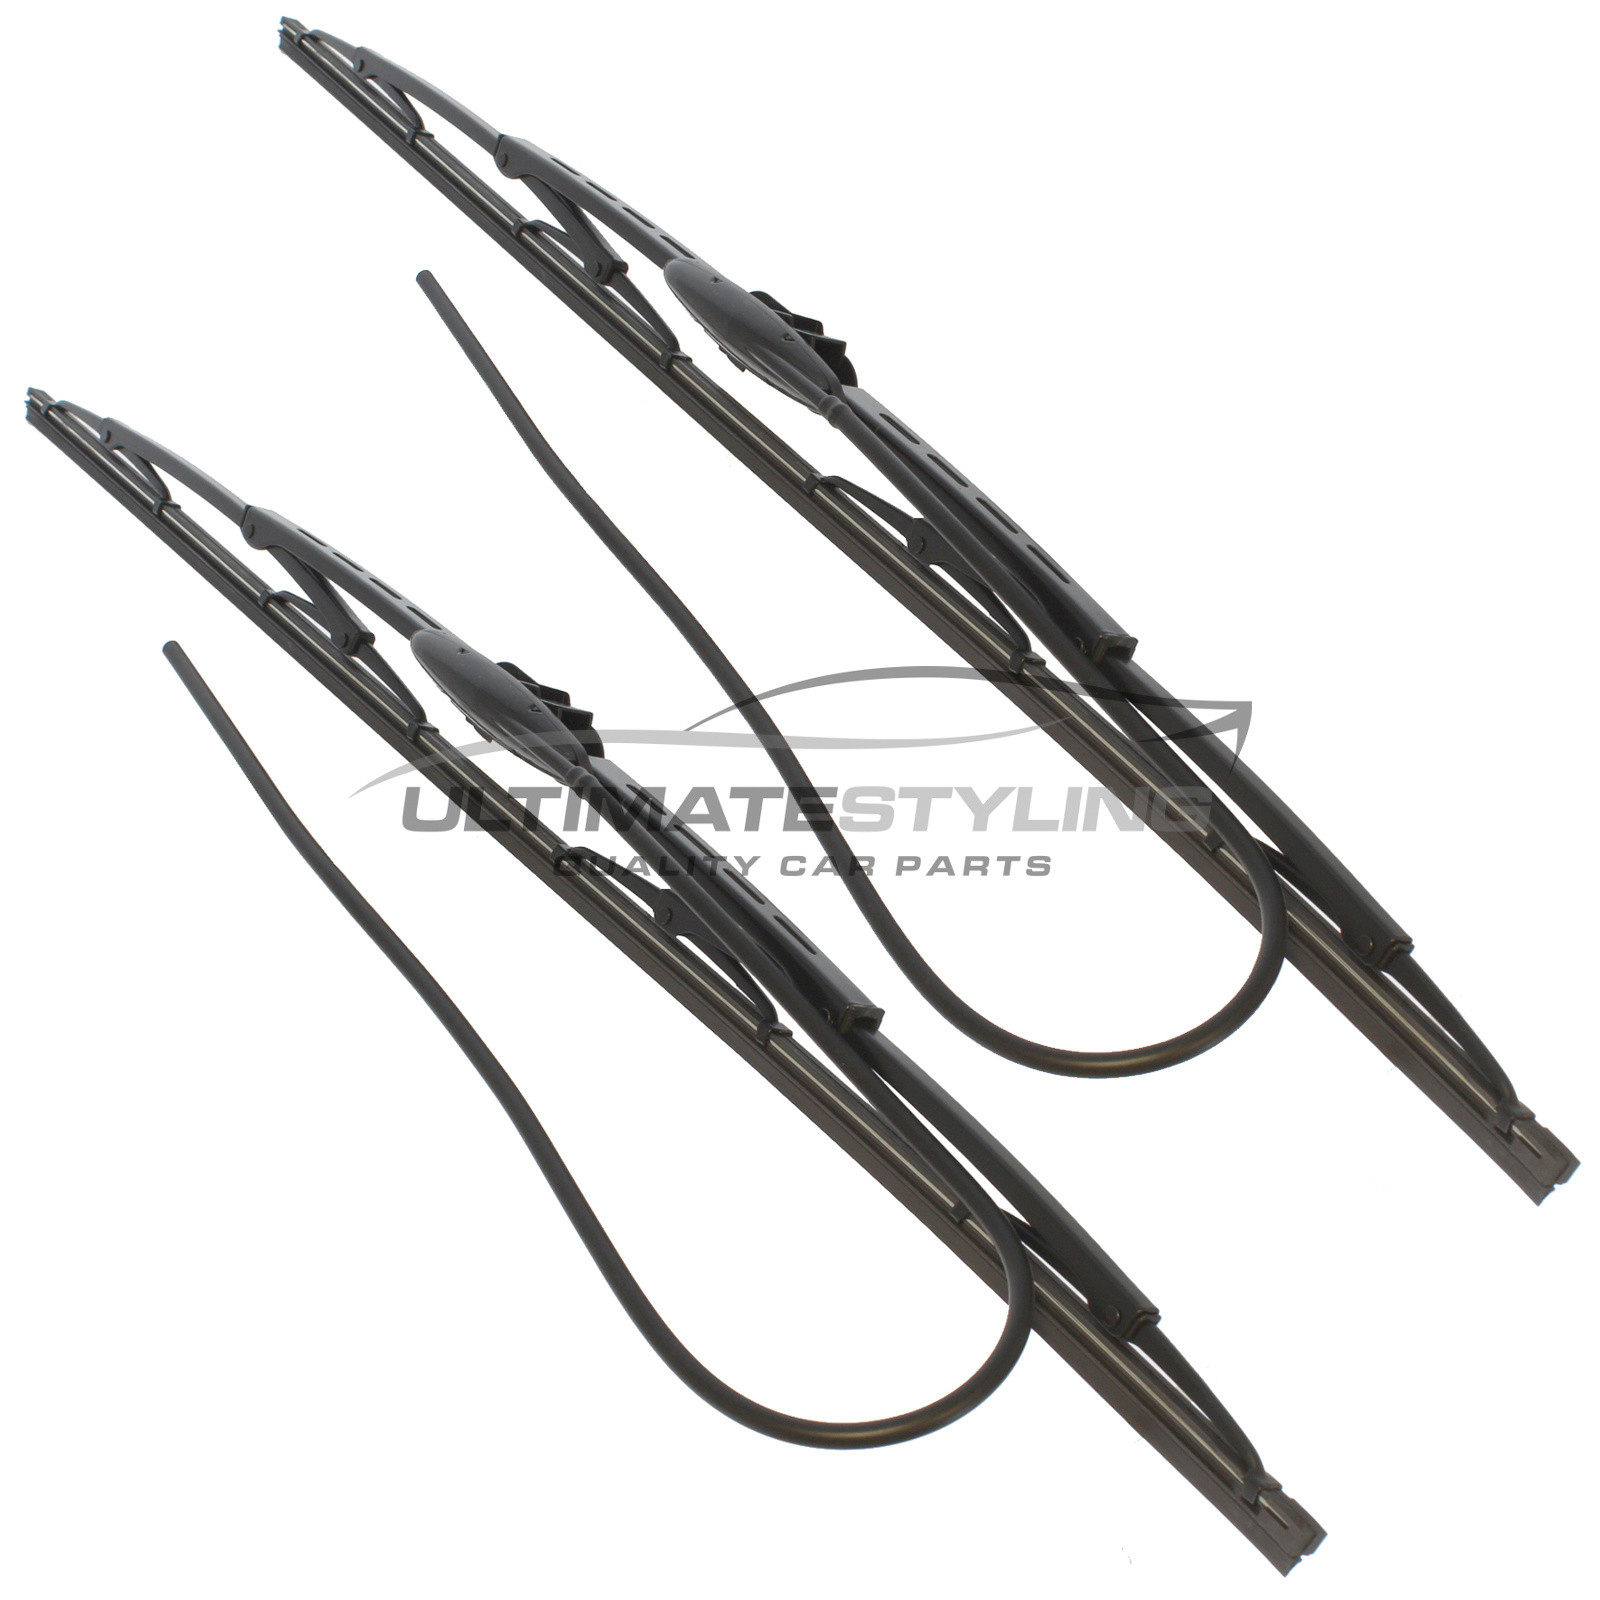 Drivers Side & Passenger Side (Front) Wiper Blades & Washer Kits for Renault Espace